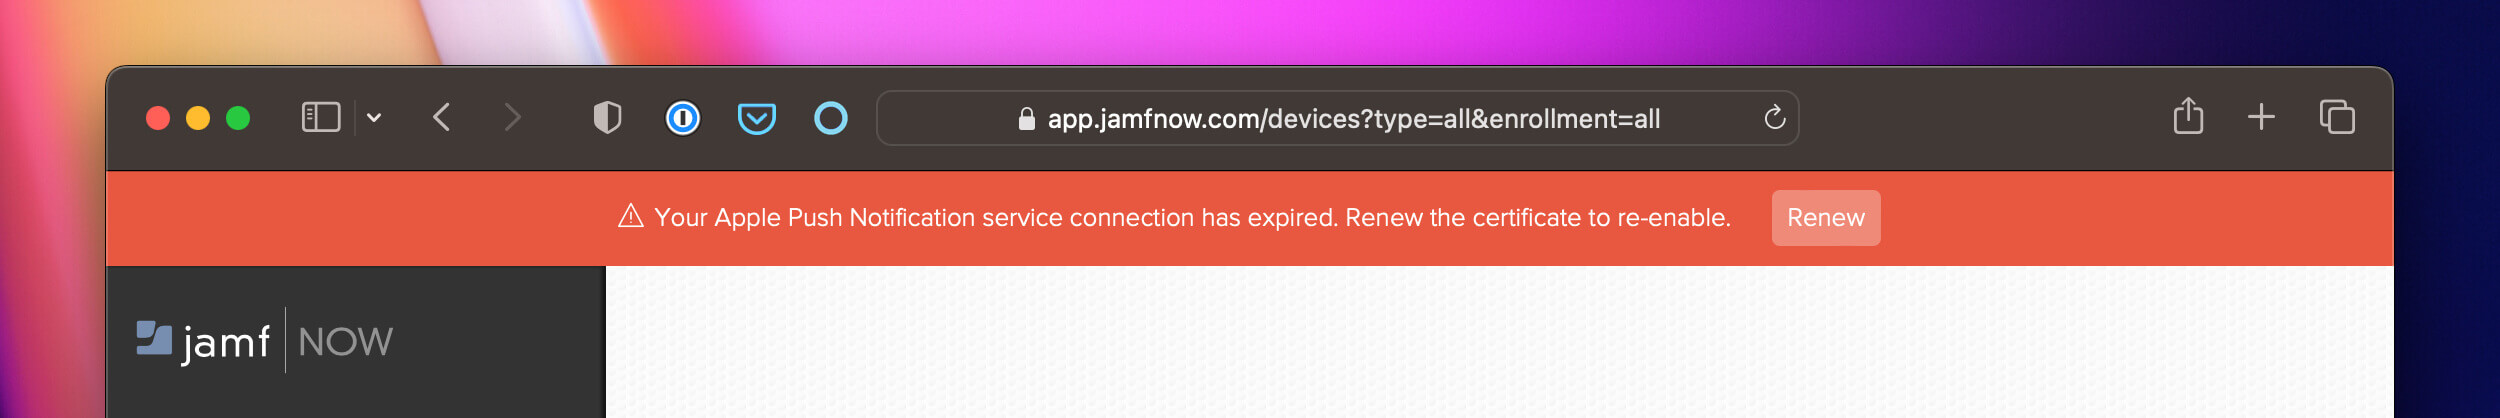 A red banner spans the top of the web app with a message reading 'A Your Apple Push Notification service connection has expired. Renew the certificate to re-enable.'